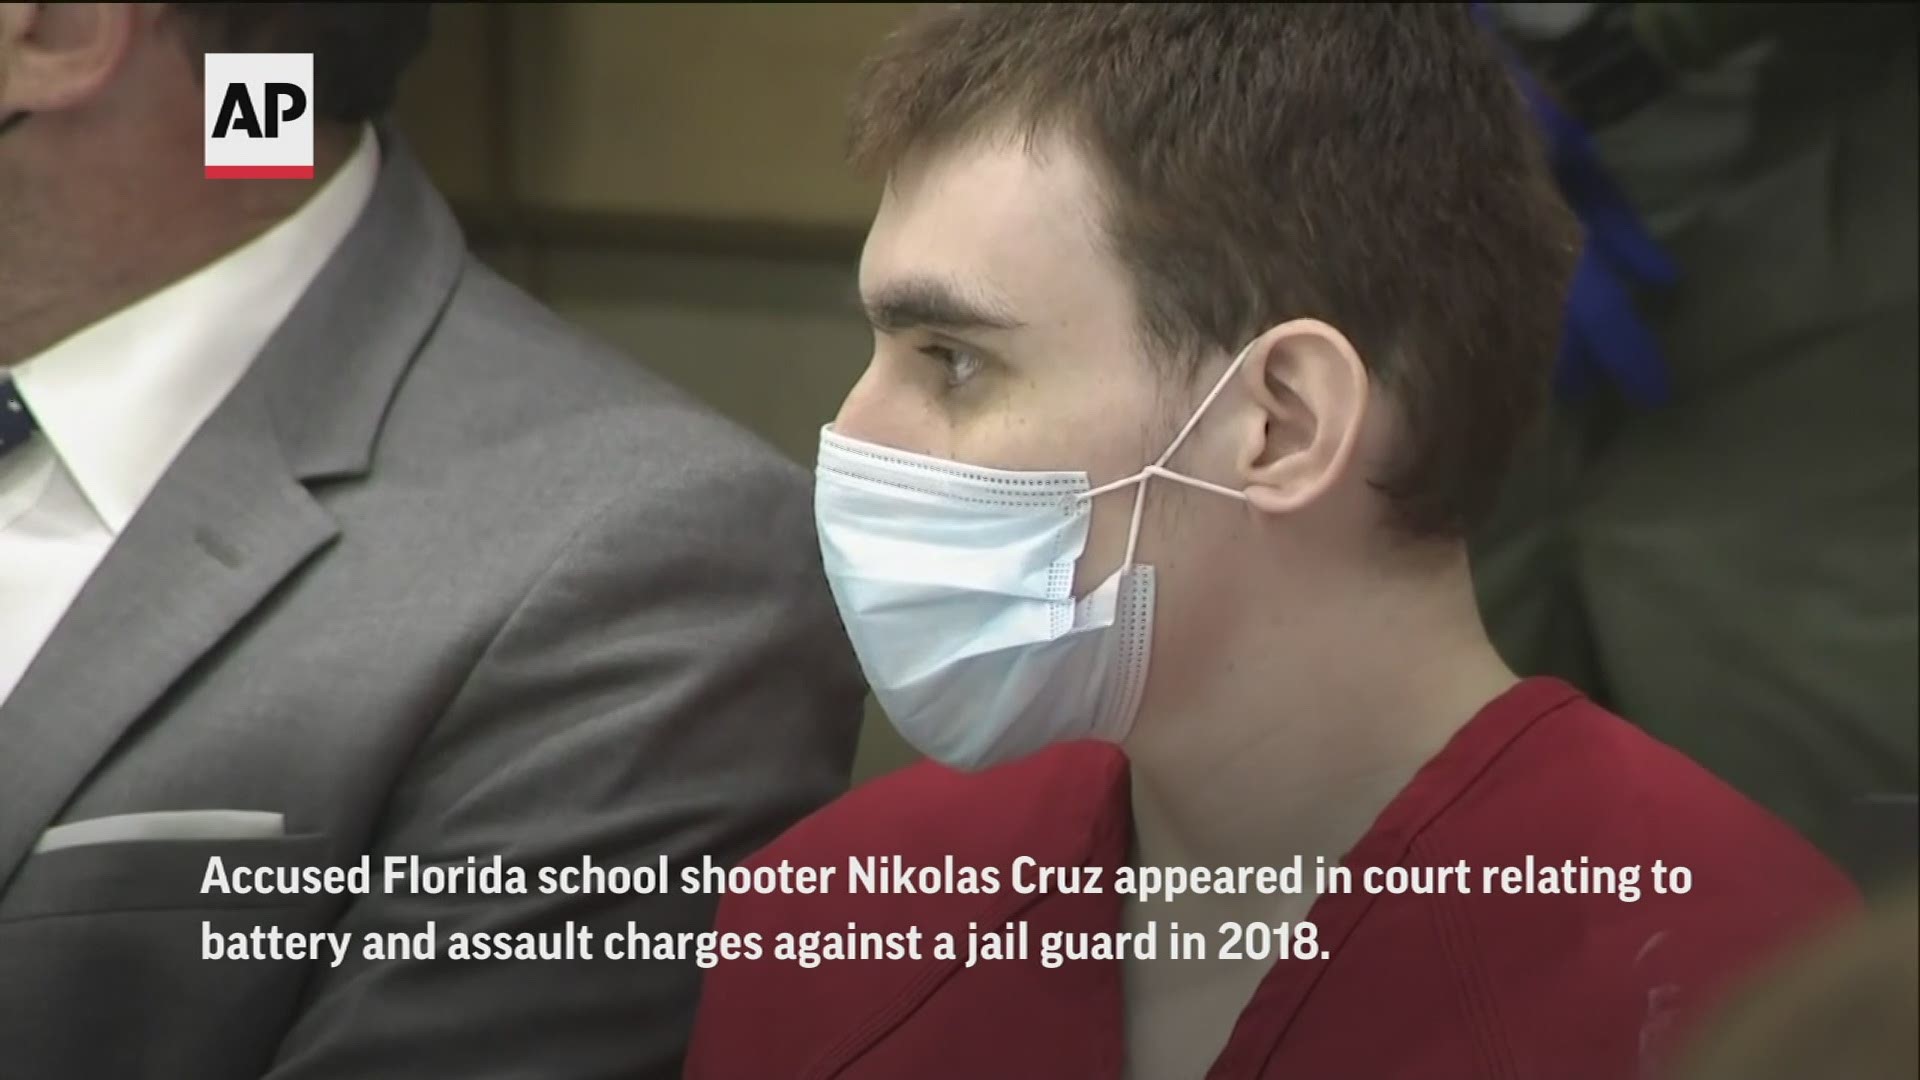 Accused Florida school shooter Nikolas Cruz rushed at a jail guard and was briefly able to wrestle him to the ground during a 2018 altercation, video shows.